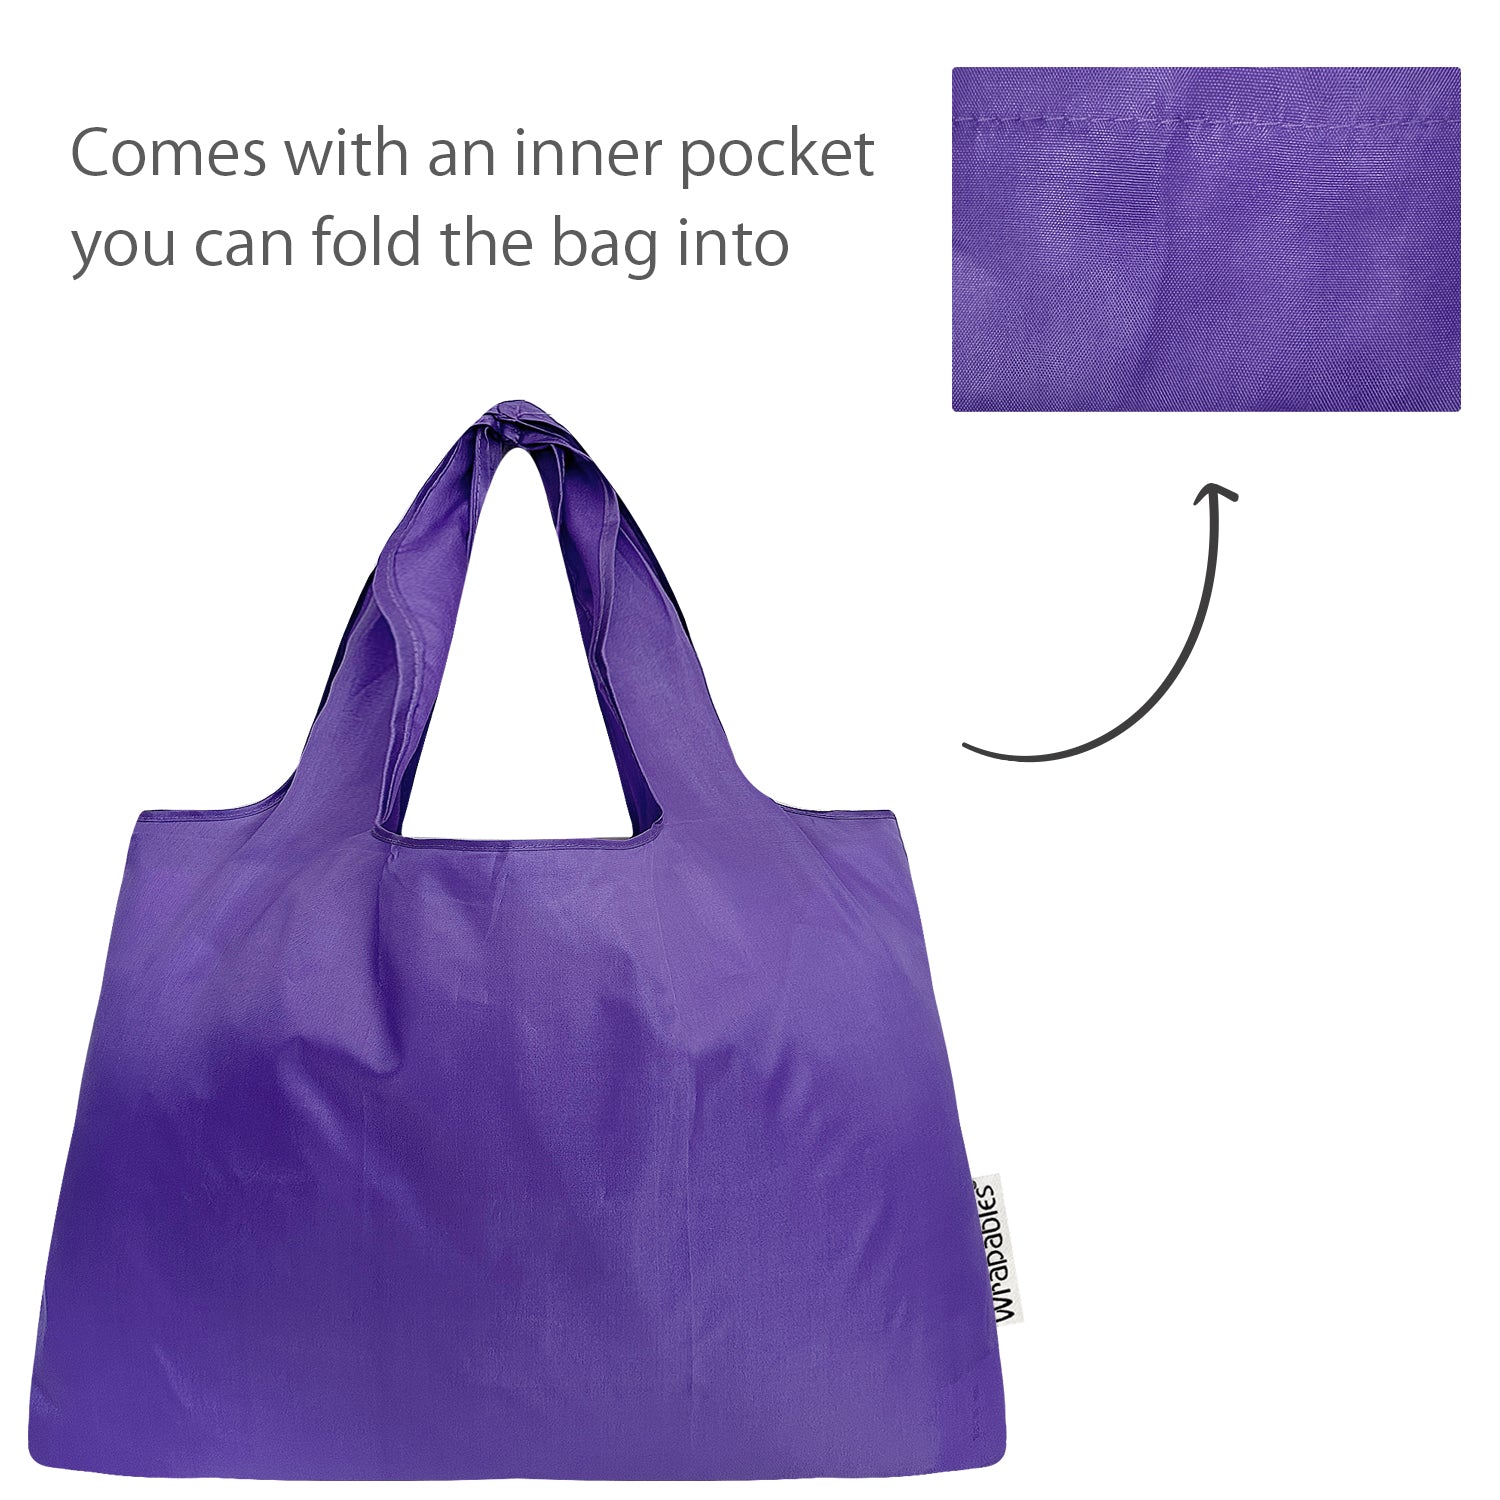 Wrapables Large & Small Foldable Tote Nylon Reusable Grocery Bags, Set of  2, Purple